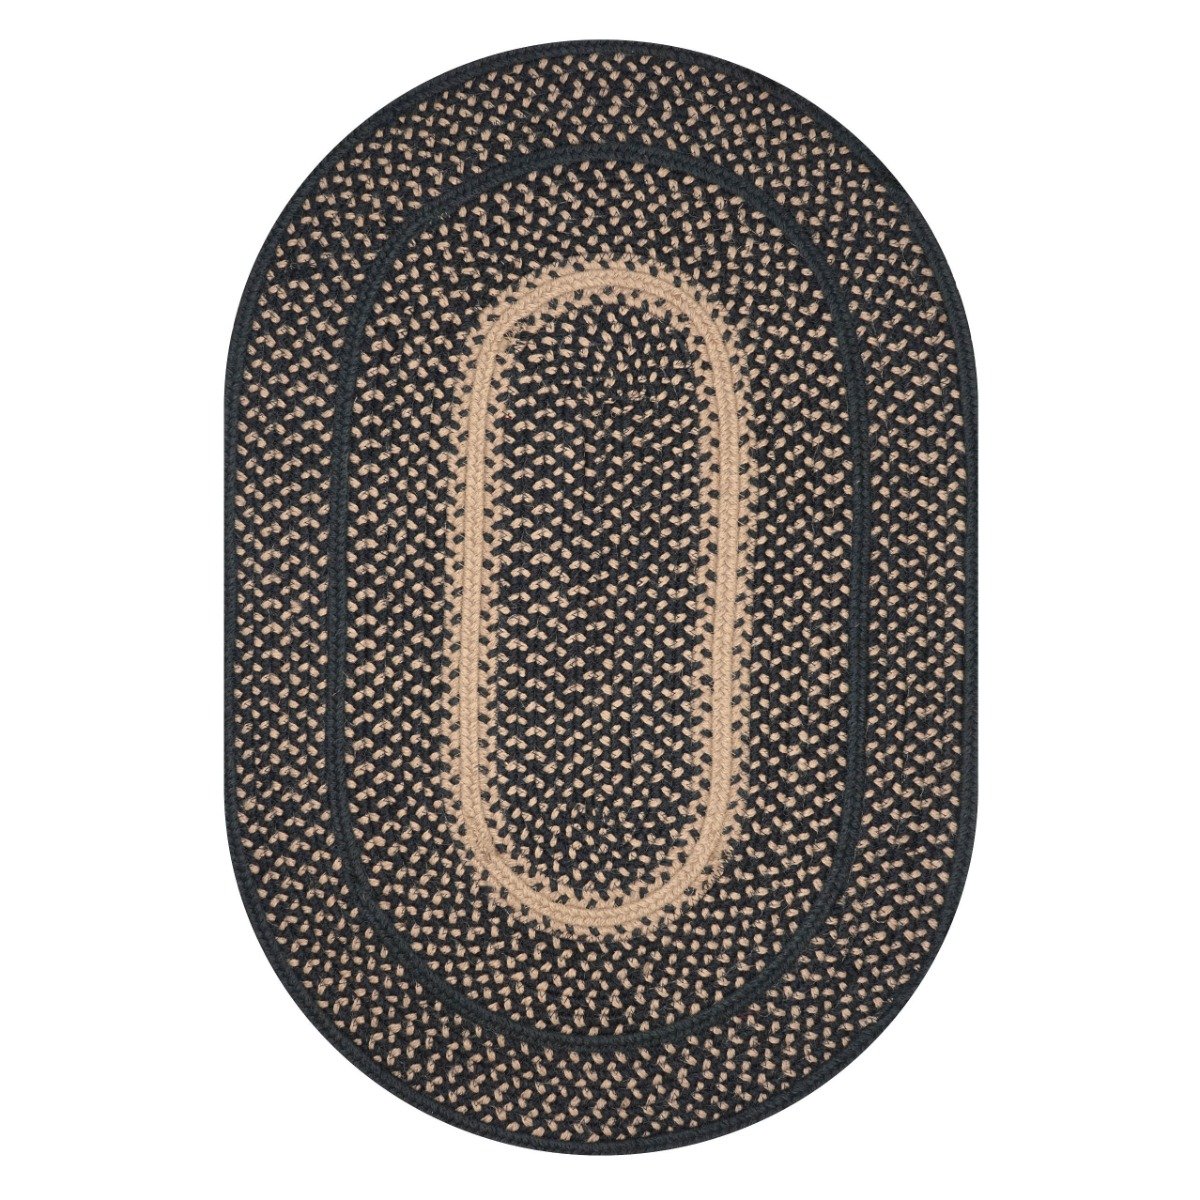 Manchester Black-Tan Oval Jute Braided Rugs Reversible